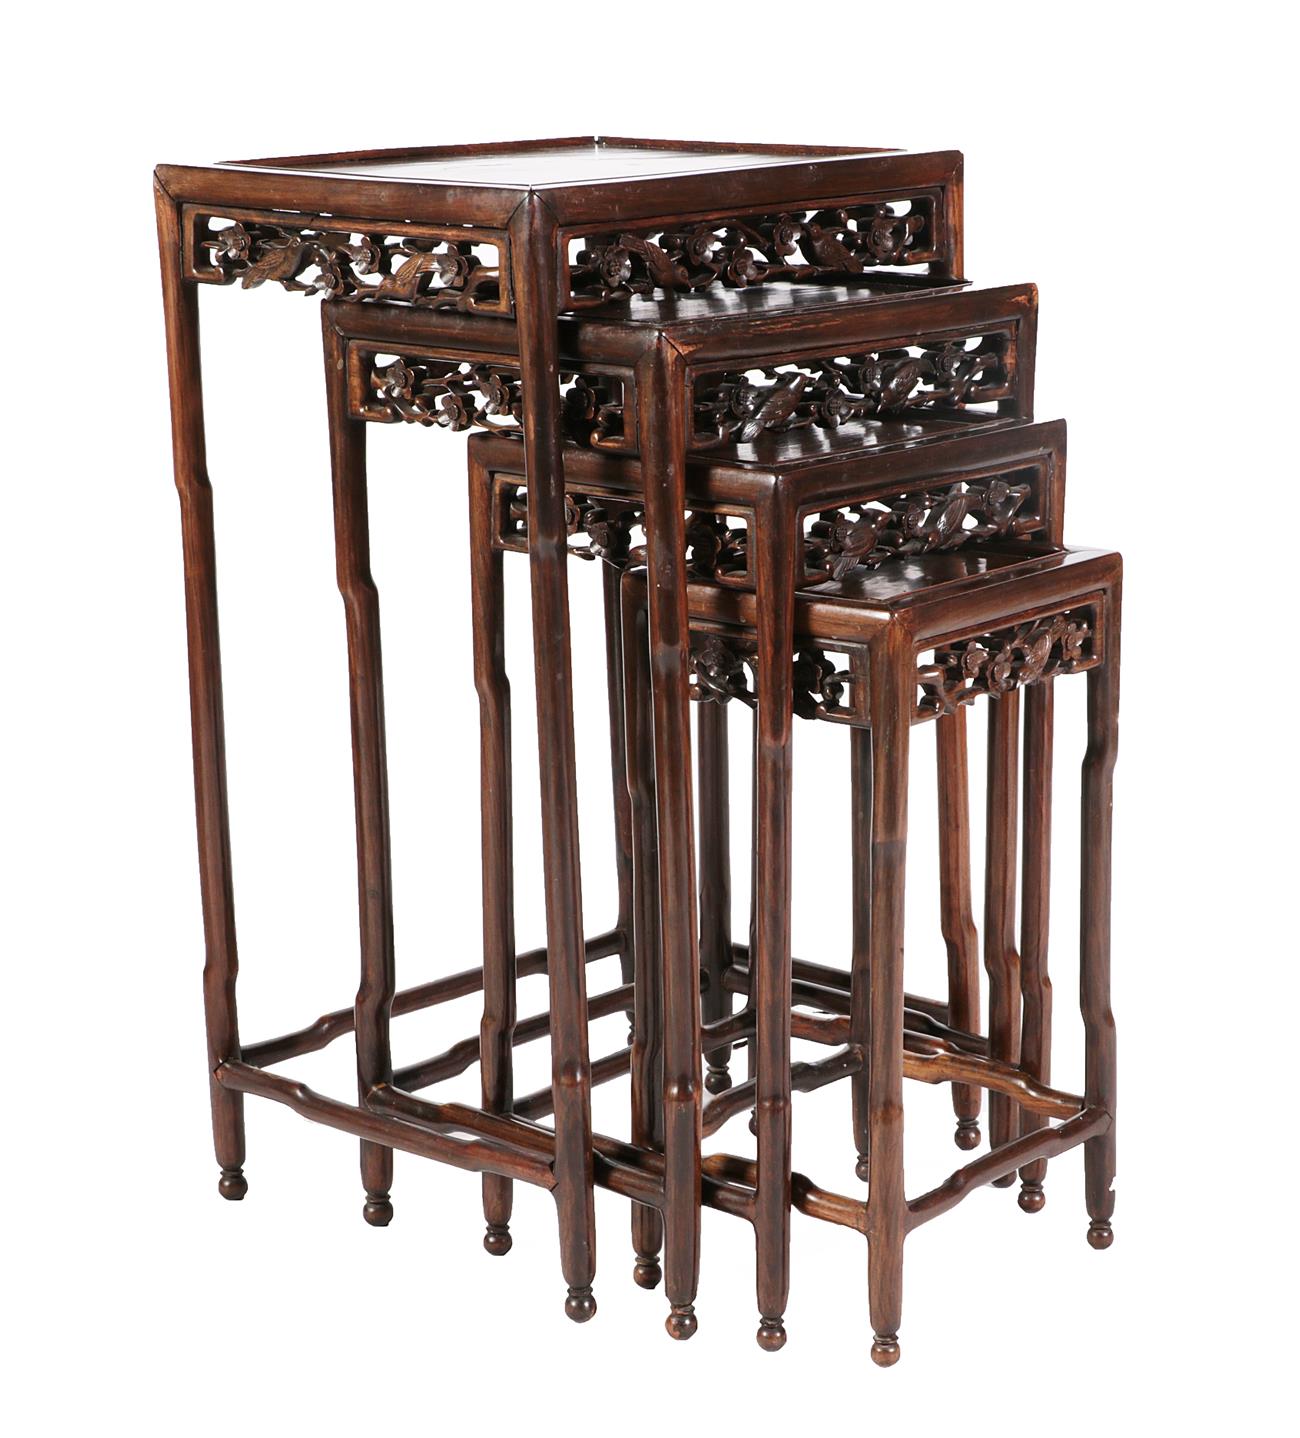 Lot 604 - A Quartetto Nest of Chinese Hardwood Tables, early 20th century, of graduated rectangular form with